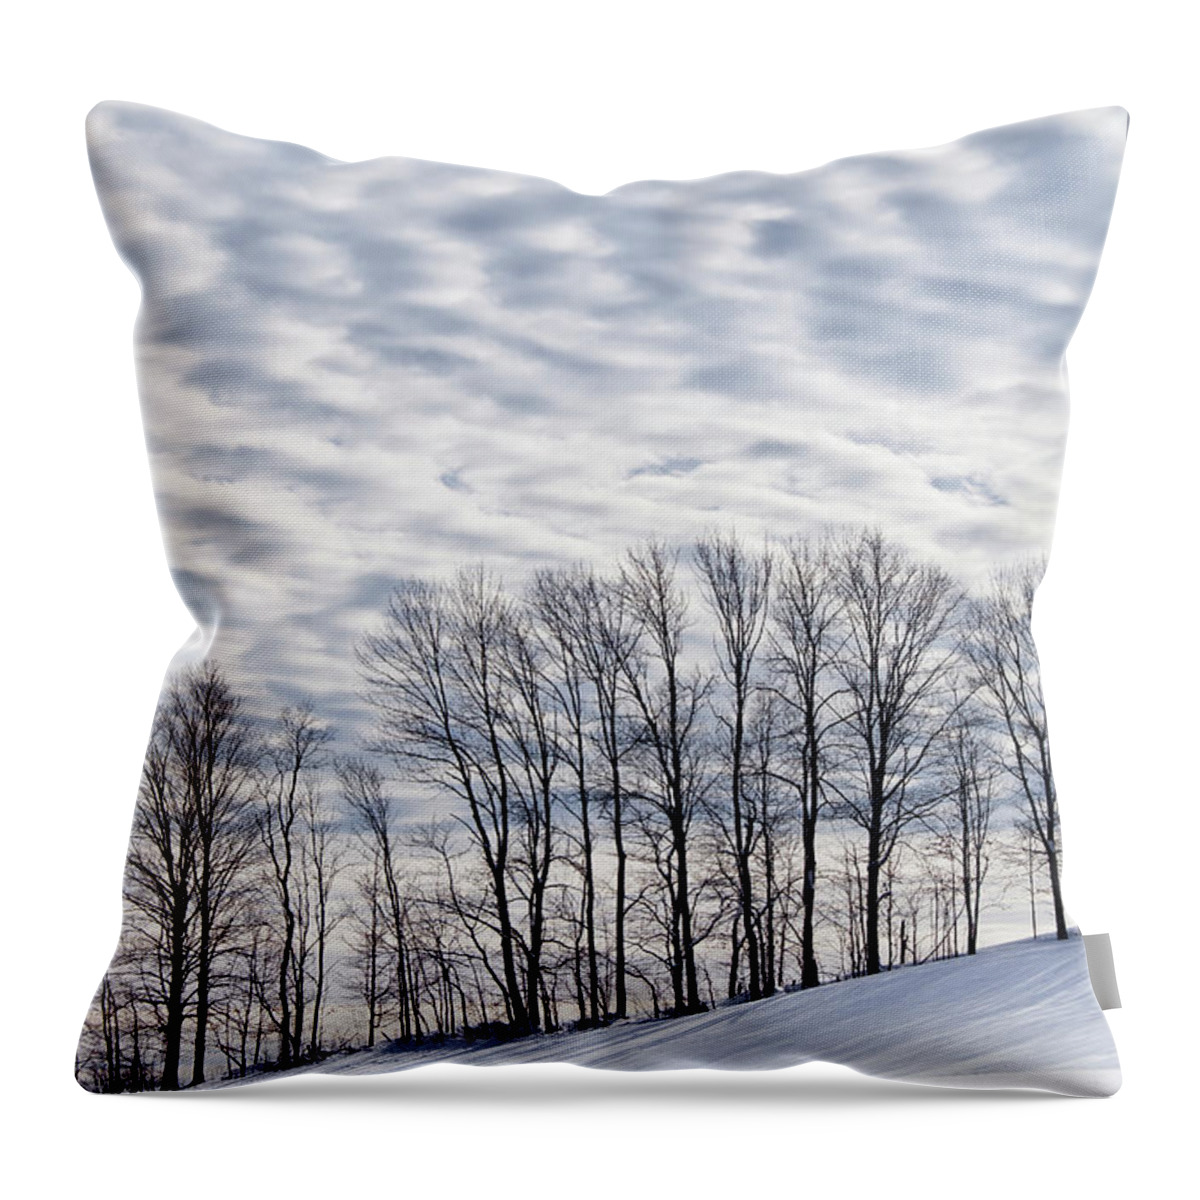 Winter Throw Pillow featuring the photograph Midwinter Landscape by Alan L Graham